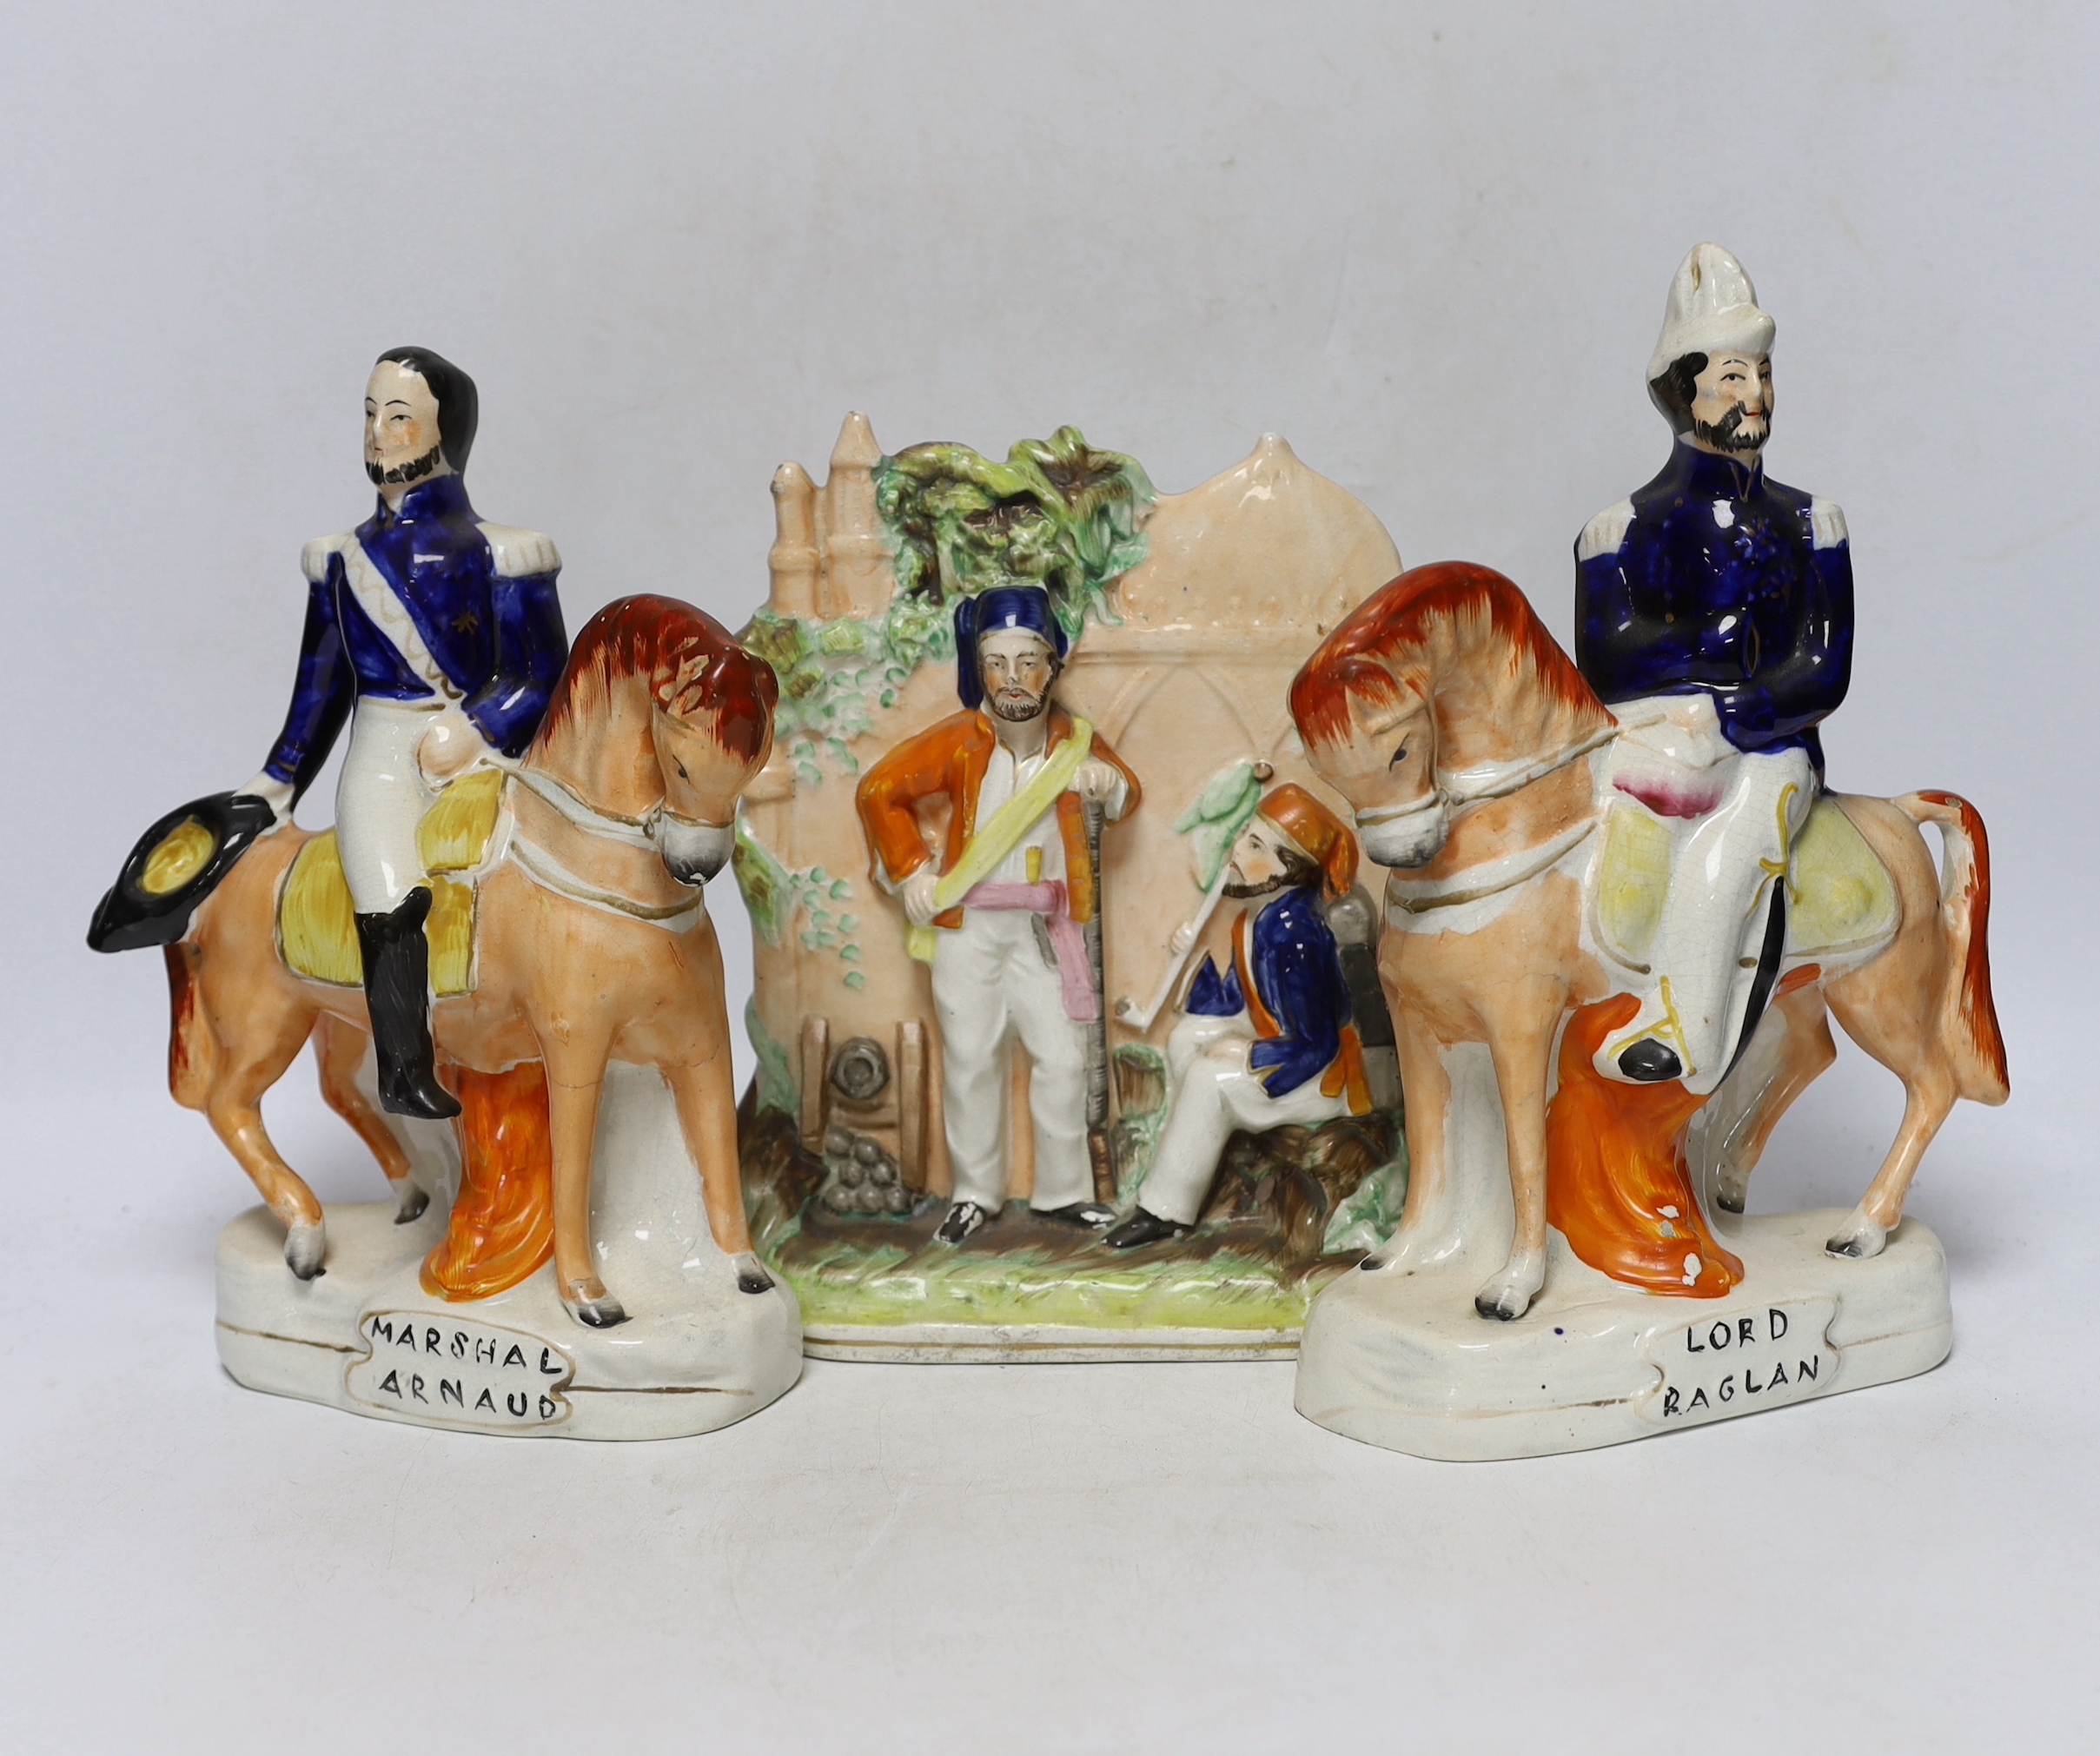 Three mid 19th century Staffordshire figure groups including Lord Raglan and Marshal Arnaud and Turkish soldiers, tallest 26.5cm